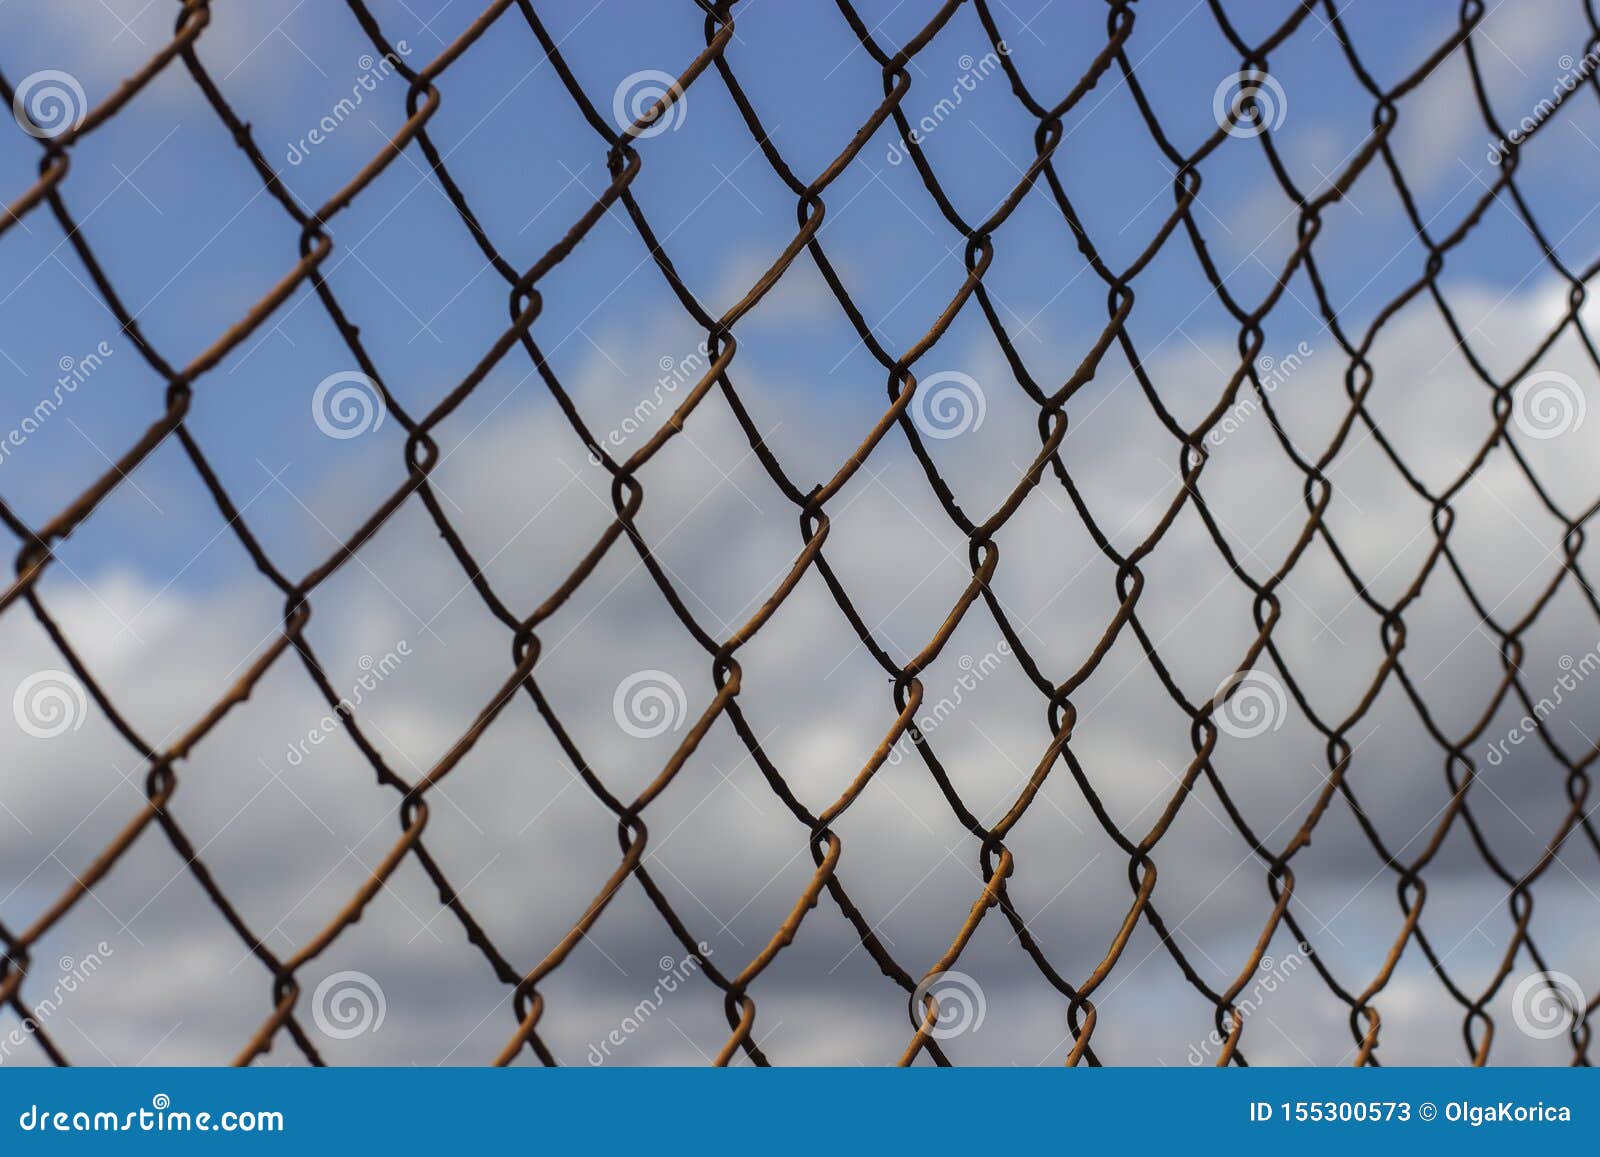 Old Rusty Mesh Netting Diagonally Against A Blue Sky With Clouds ...
